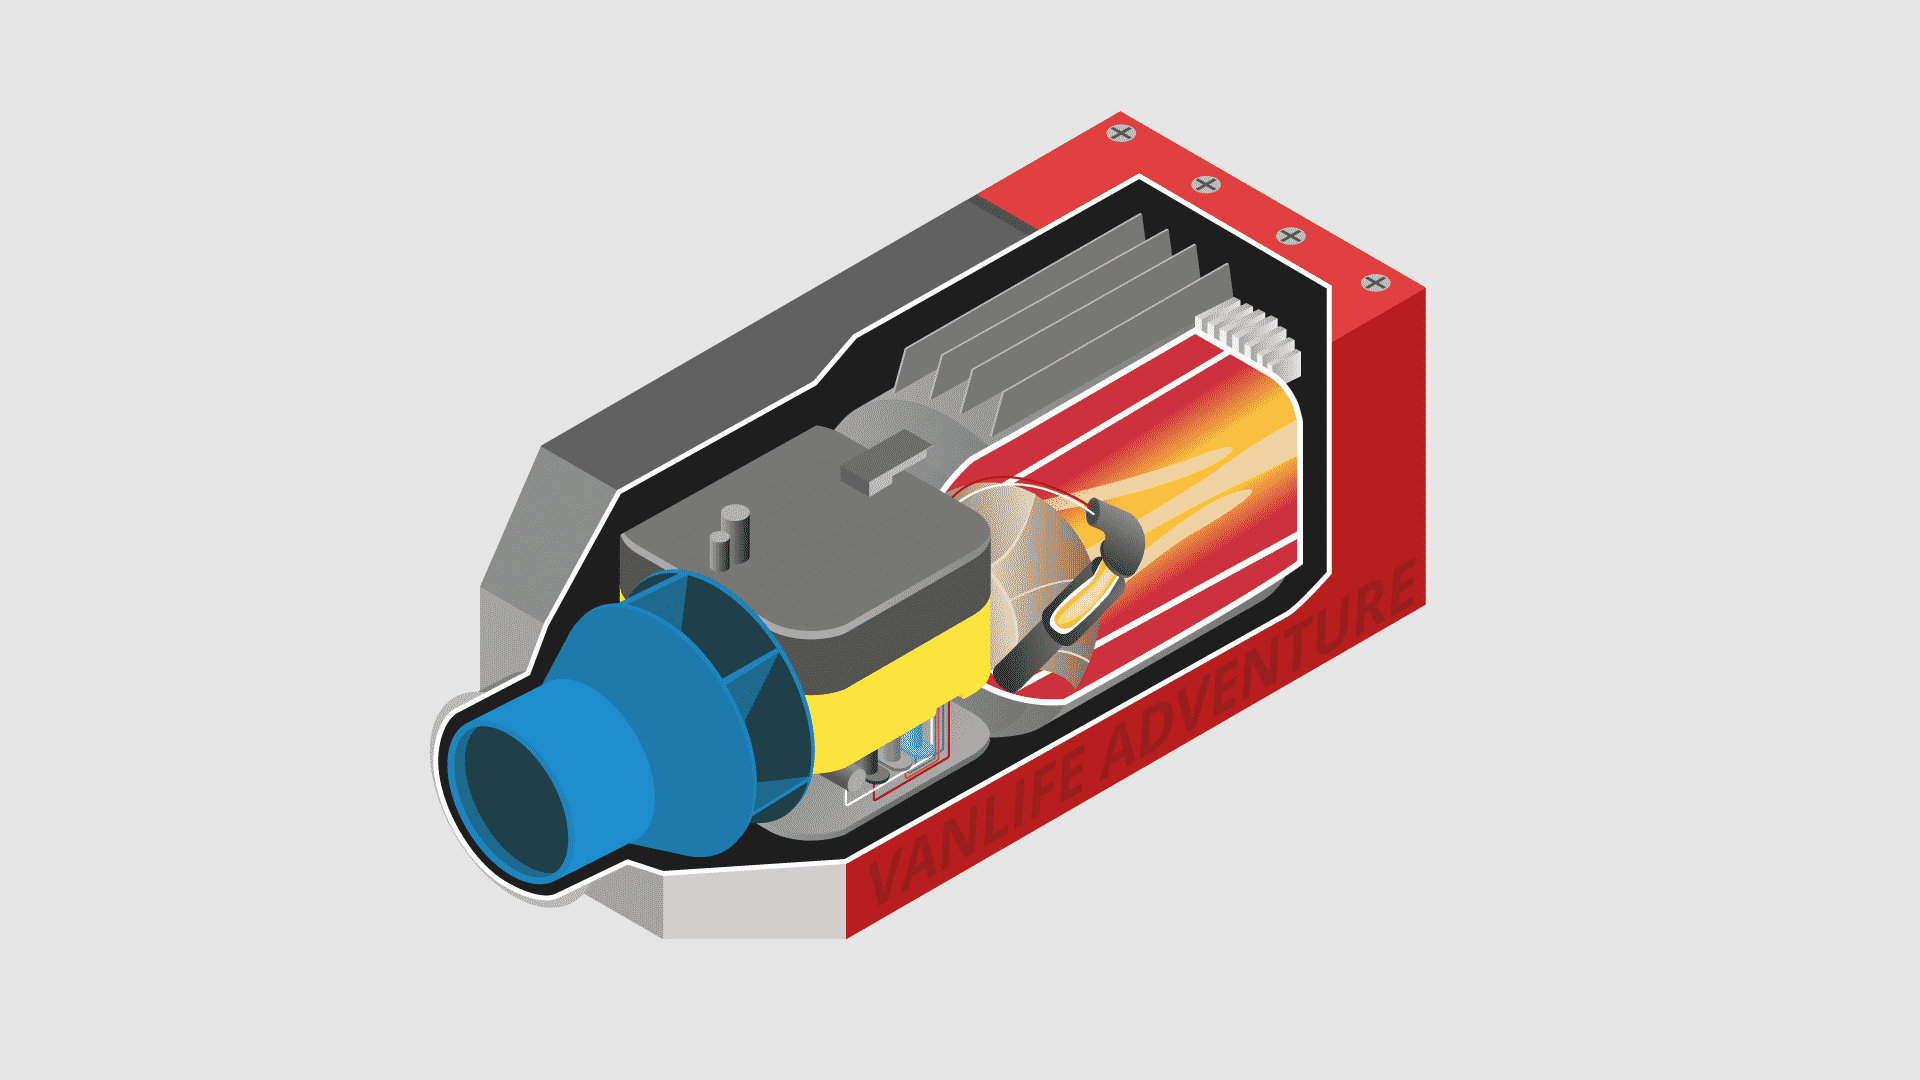 A cross-section of a diesel night heater showing how it works